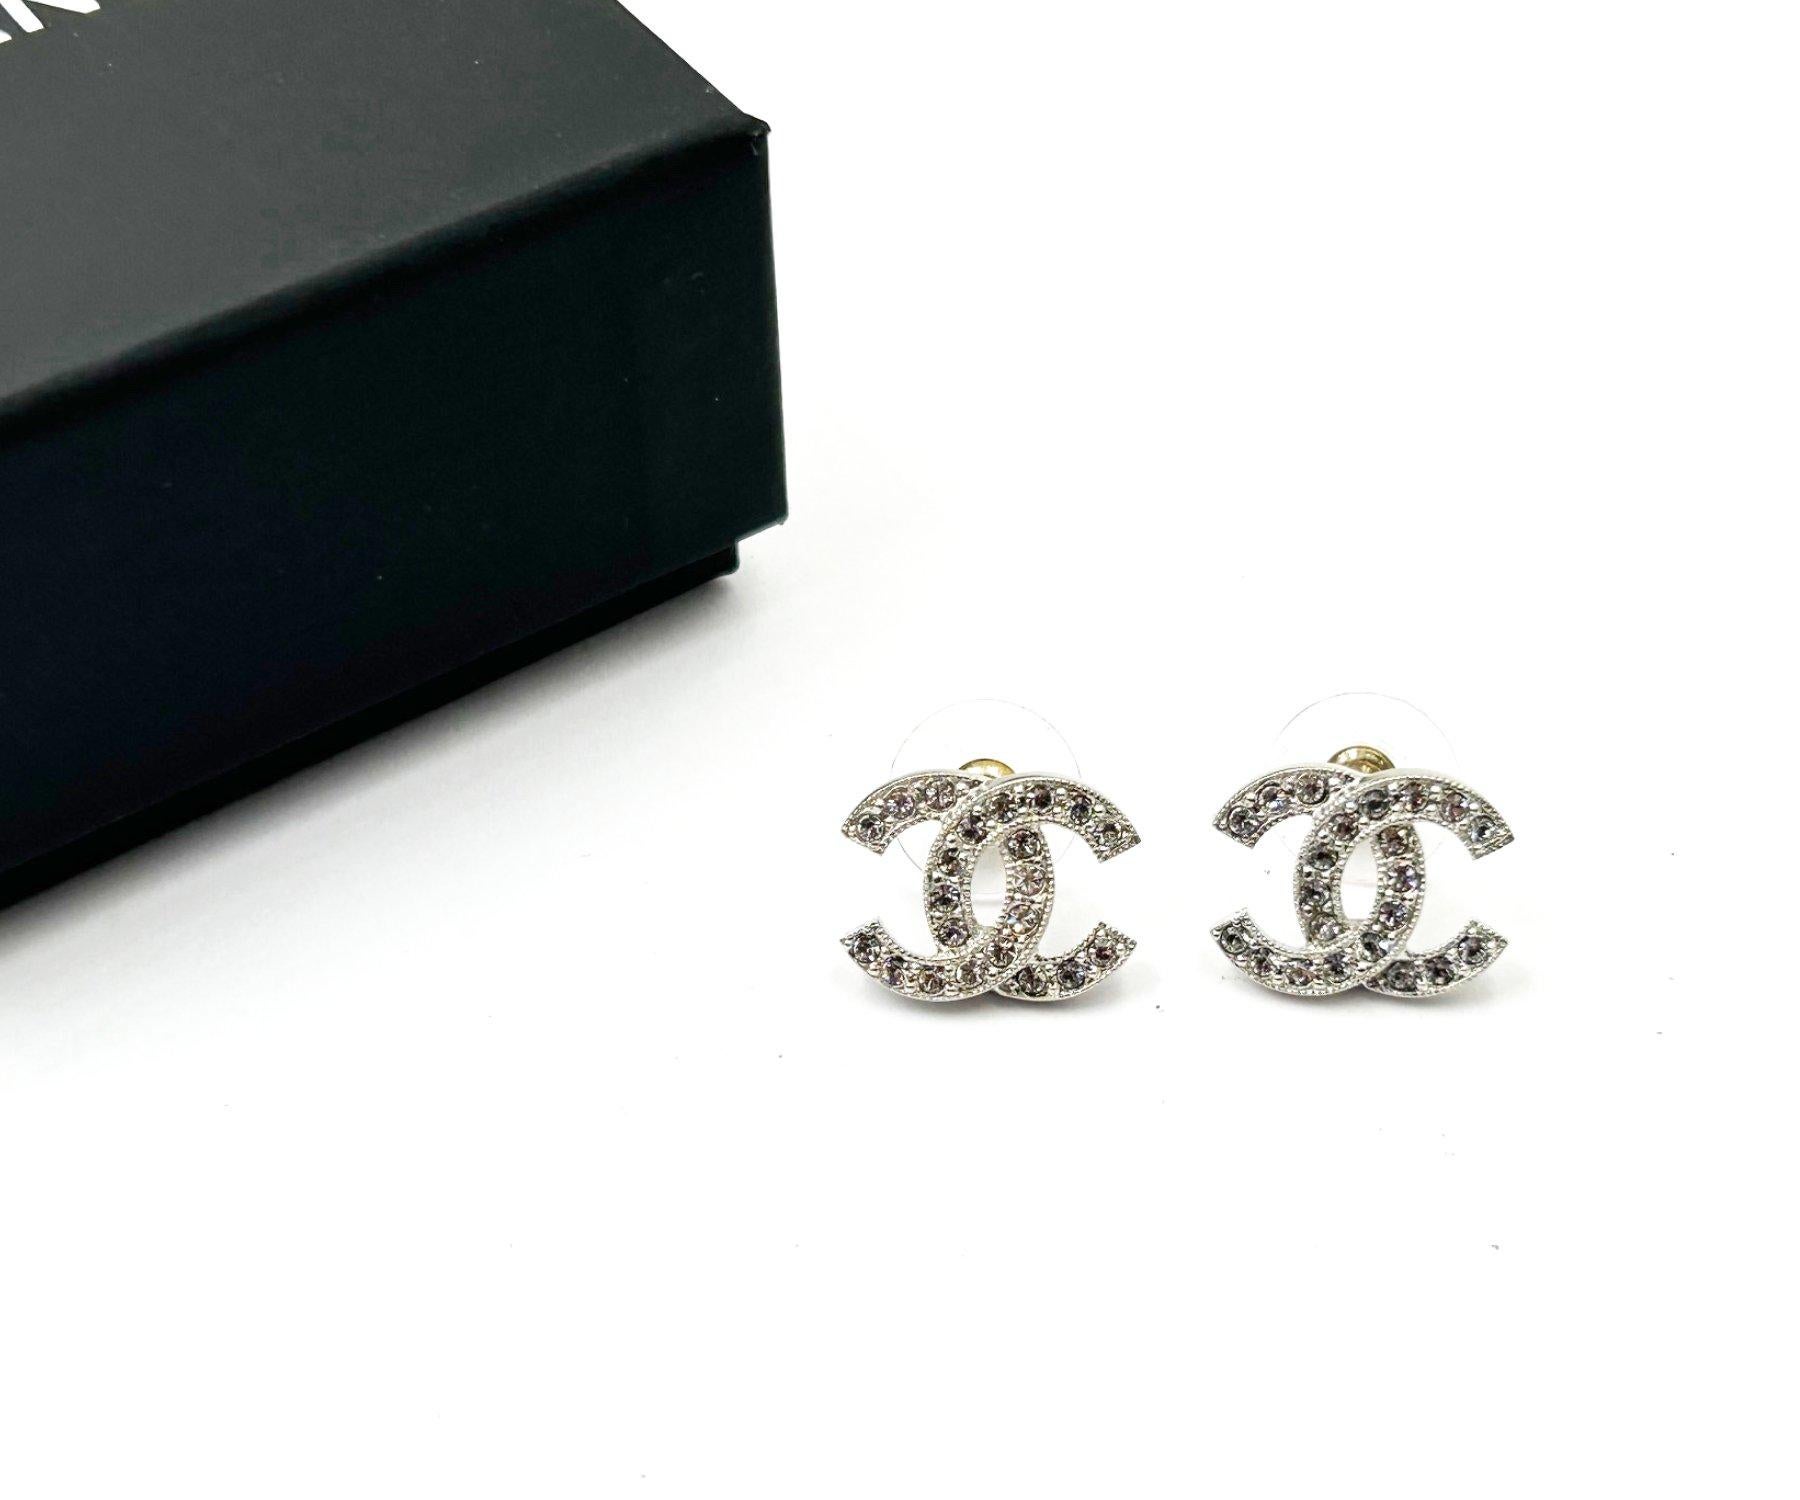 Artisan Chanel Iconic Classic Silver CC Crystal Reissued Stud Medium Piercing Earrings   For Sale